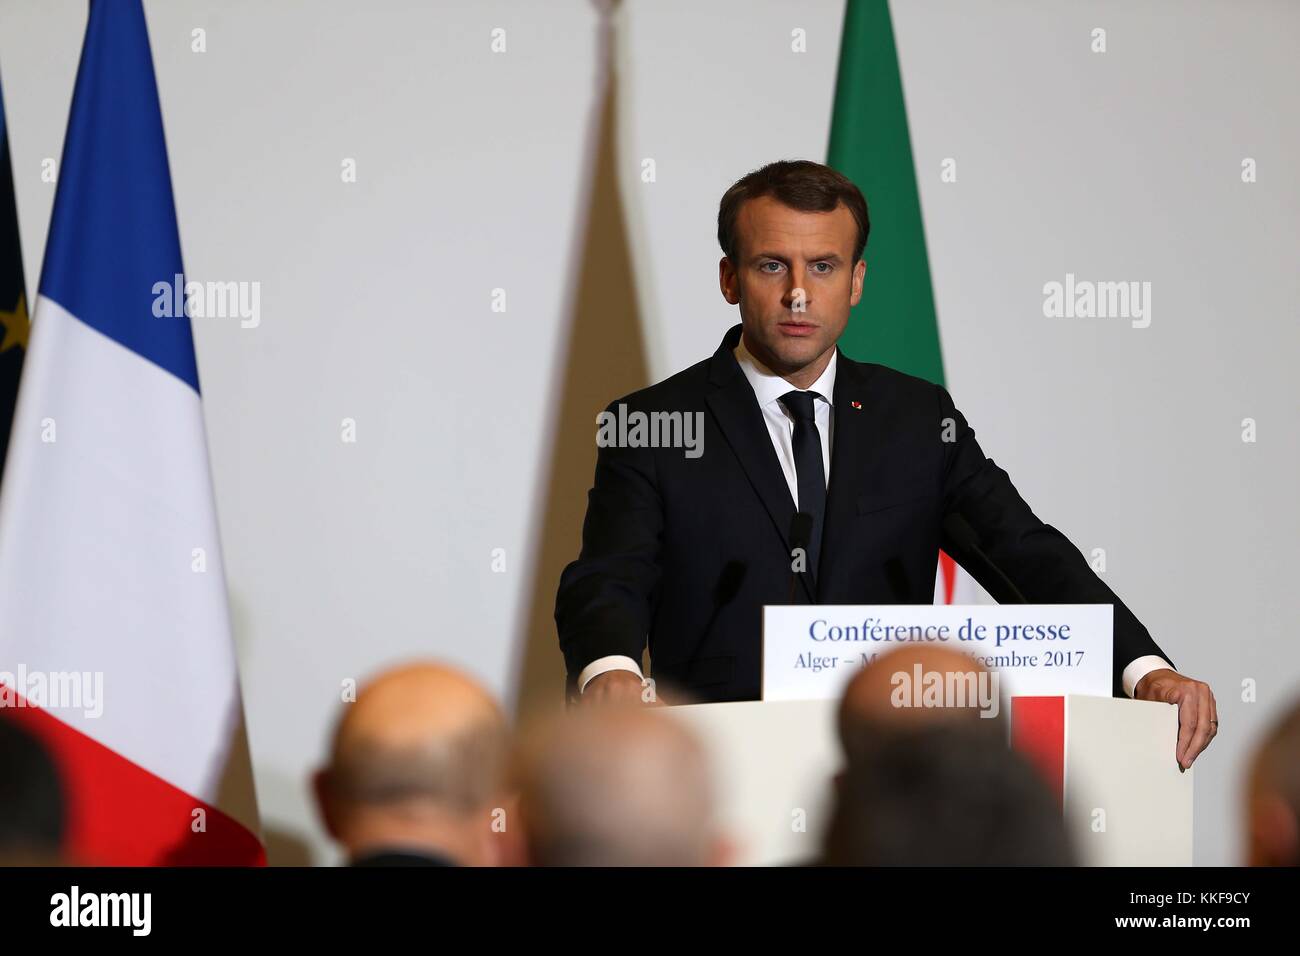 Algiers. 6th Dec, 2017. Visiting French President Emmanuel Macron attends a news conference in Algiers, Algeria, on Dec. 6, 2017. Visiting French President Emmanuel Macron said Wednesday that France does not support U.S. President Donald Trump's 'unilateral' decision to recognize Jerusalem as the capital of Israel. 'The decision is unilateral and regrettable, and France does not support it,' Macron told a news conference in Algiers after his one-day visit to the North African nation. Credit: Xinhua/Alamy Live News Stock Photo